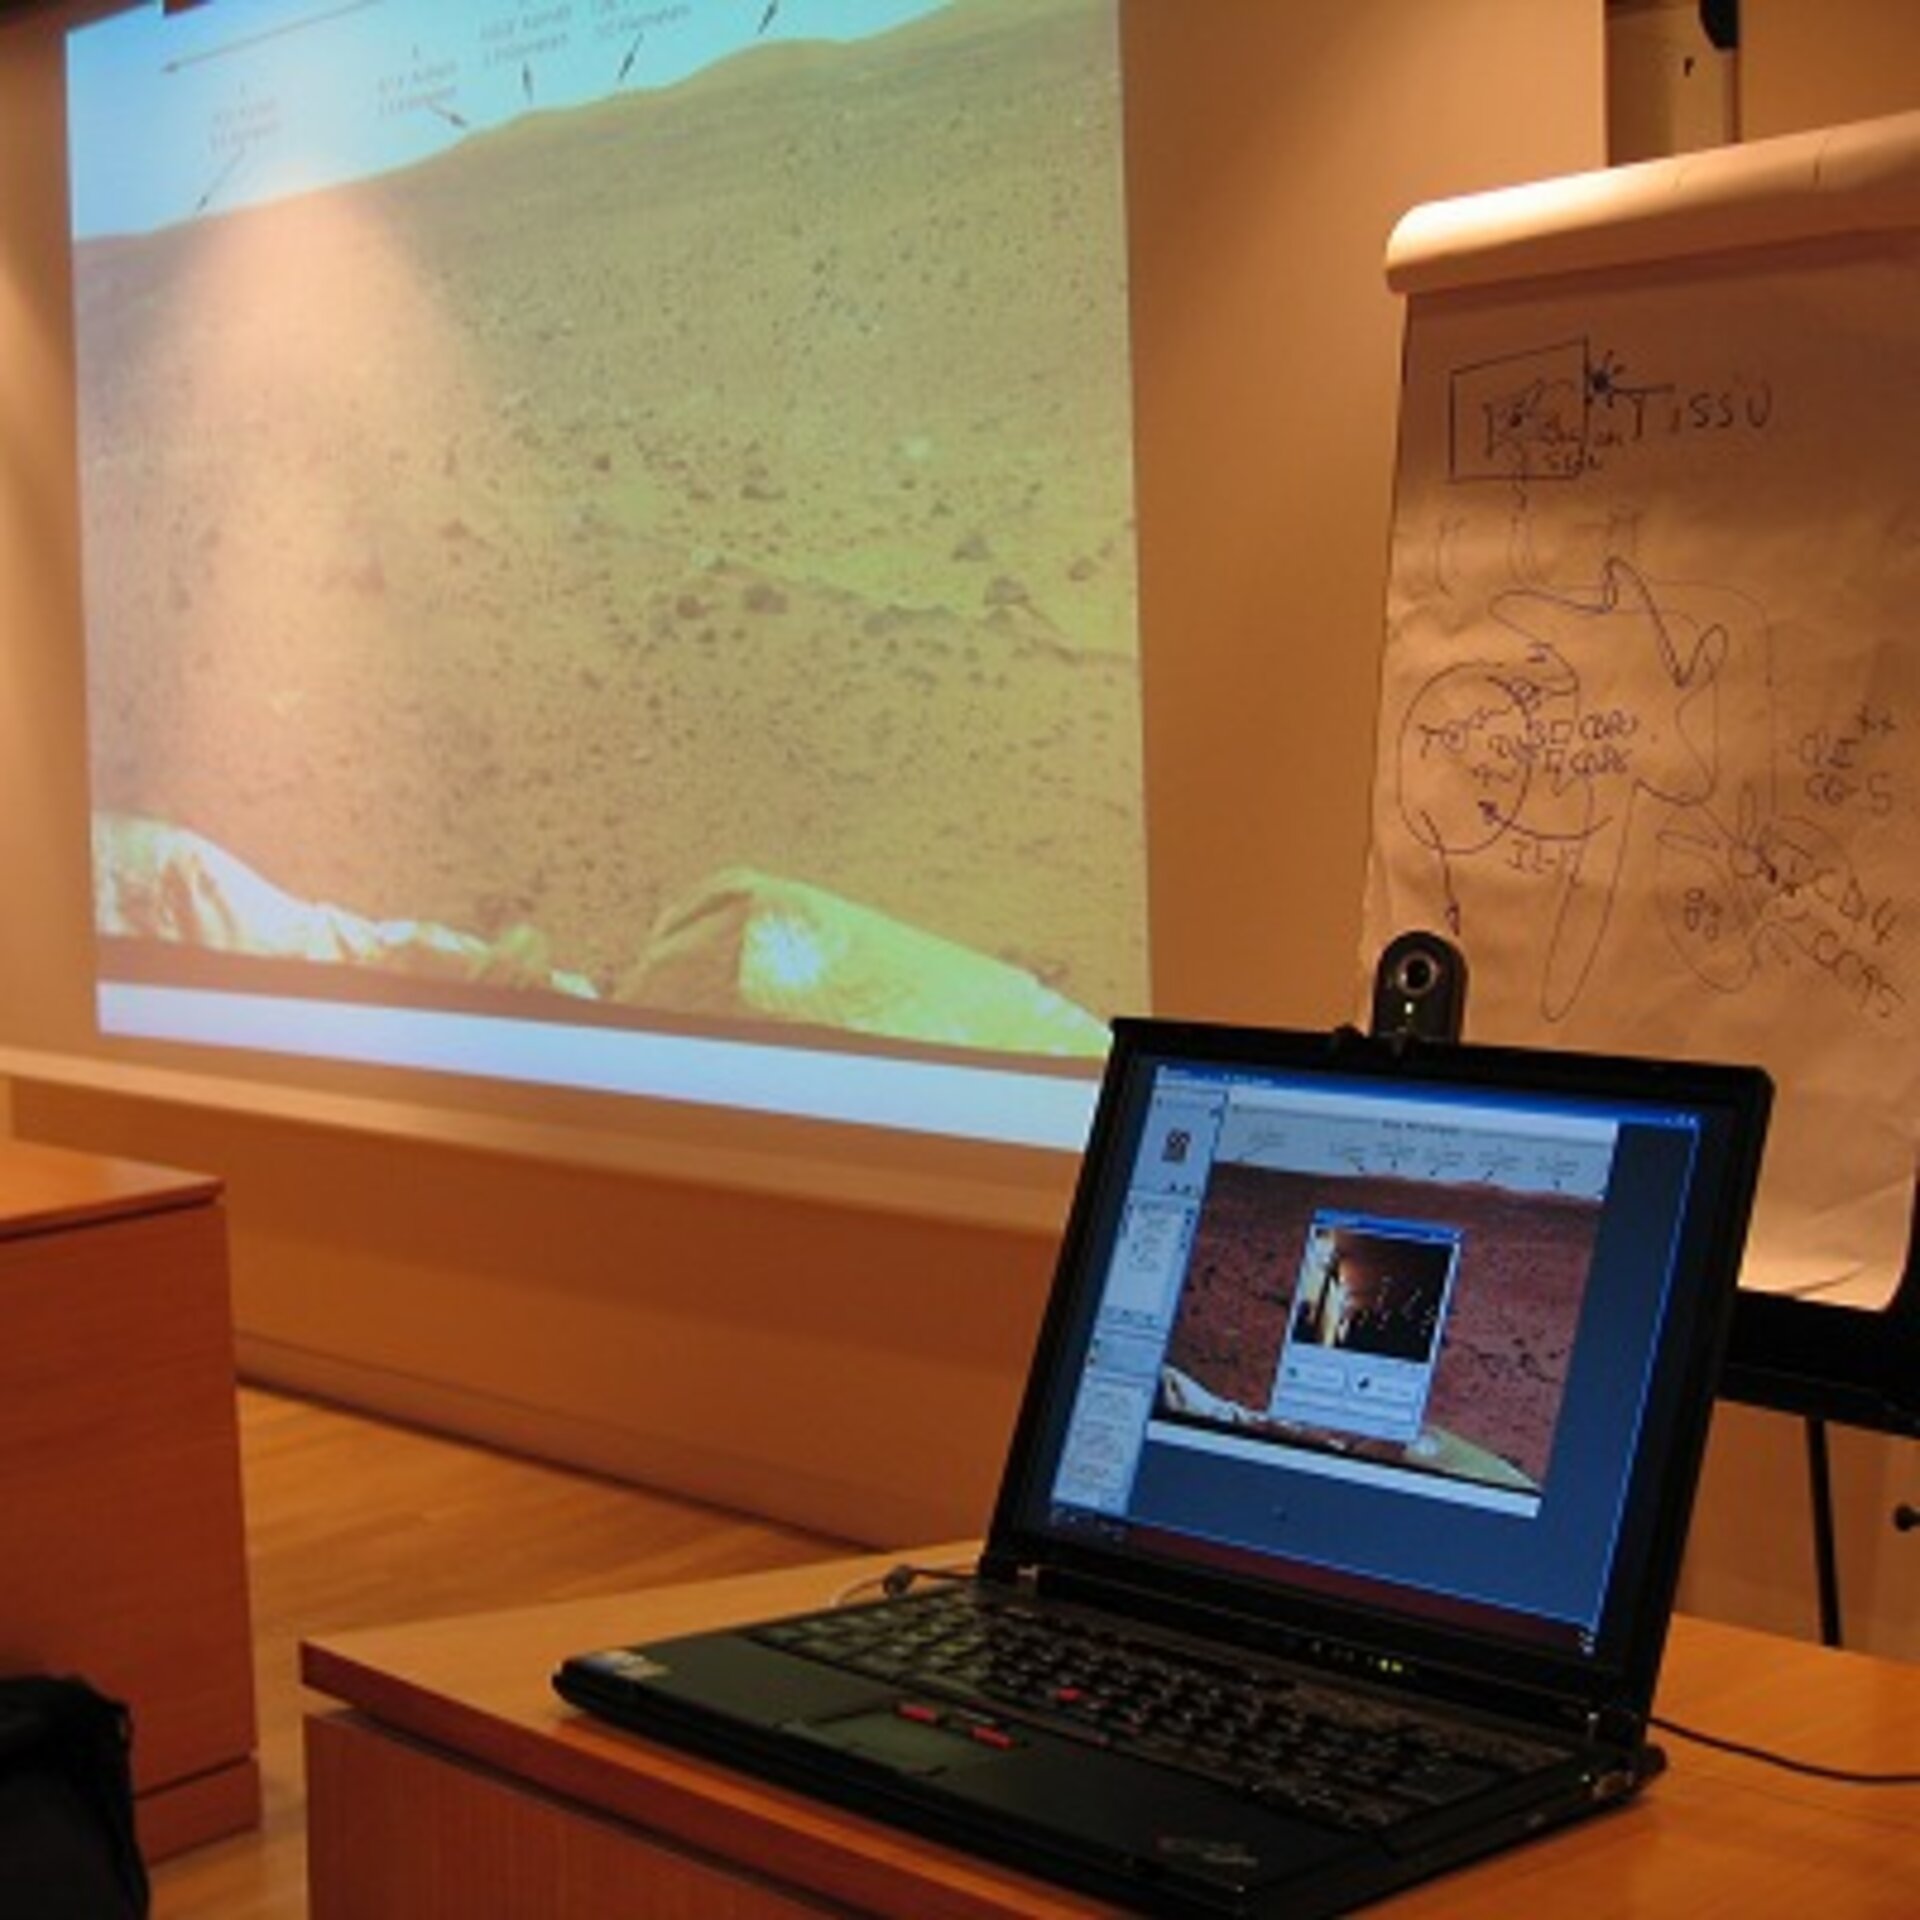 Participants could follow both the visuals and speech of the interactive lecturers over the Internet